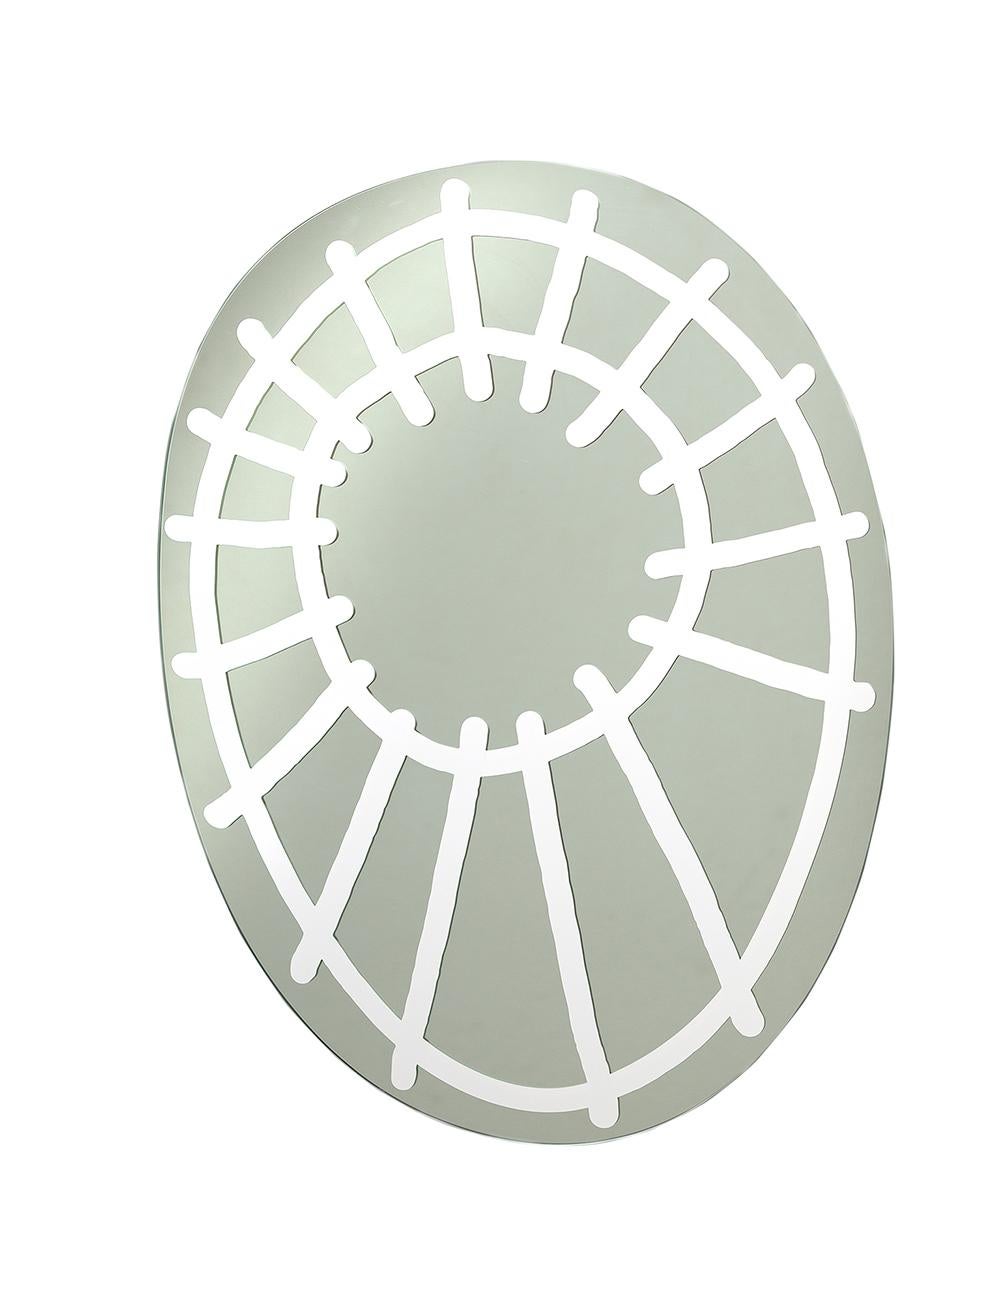 Family of wall mirrors with rounded irregular shapes, BRICK 96-97-98-99 are decorated with drawings in white paint that seem to recreate freehand brushstrokes.

Mirror with white lacquered decoration.

Additional Information:
Material: